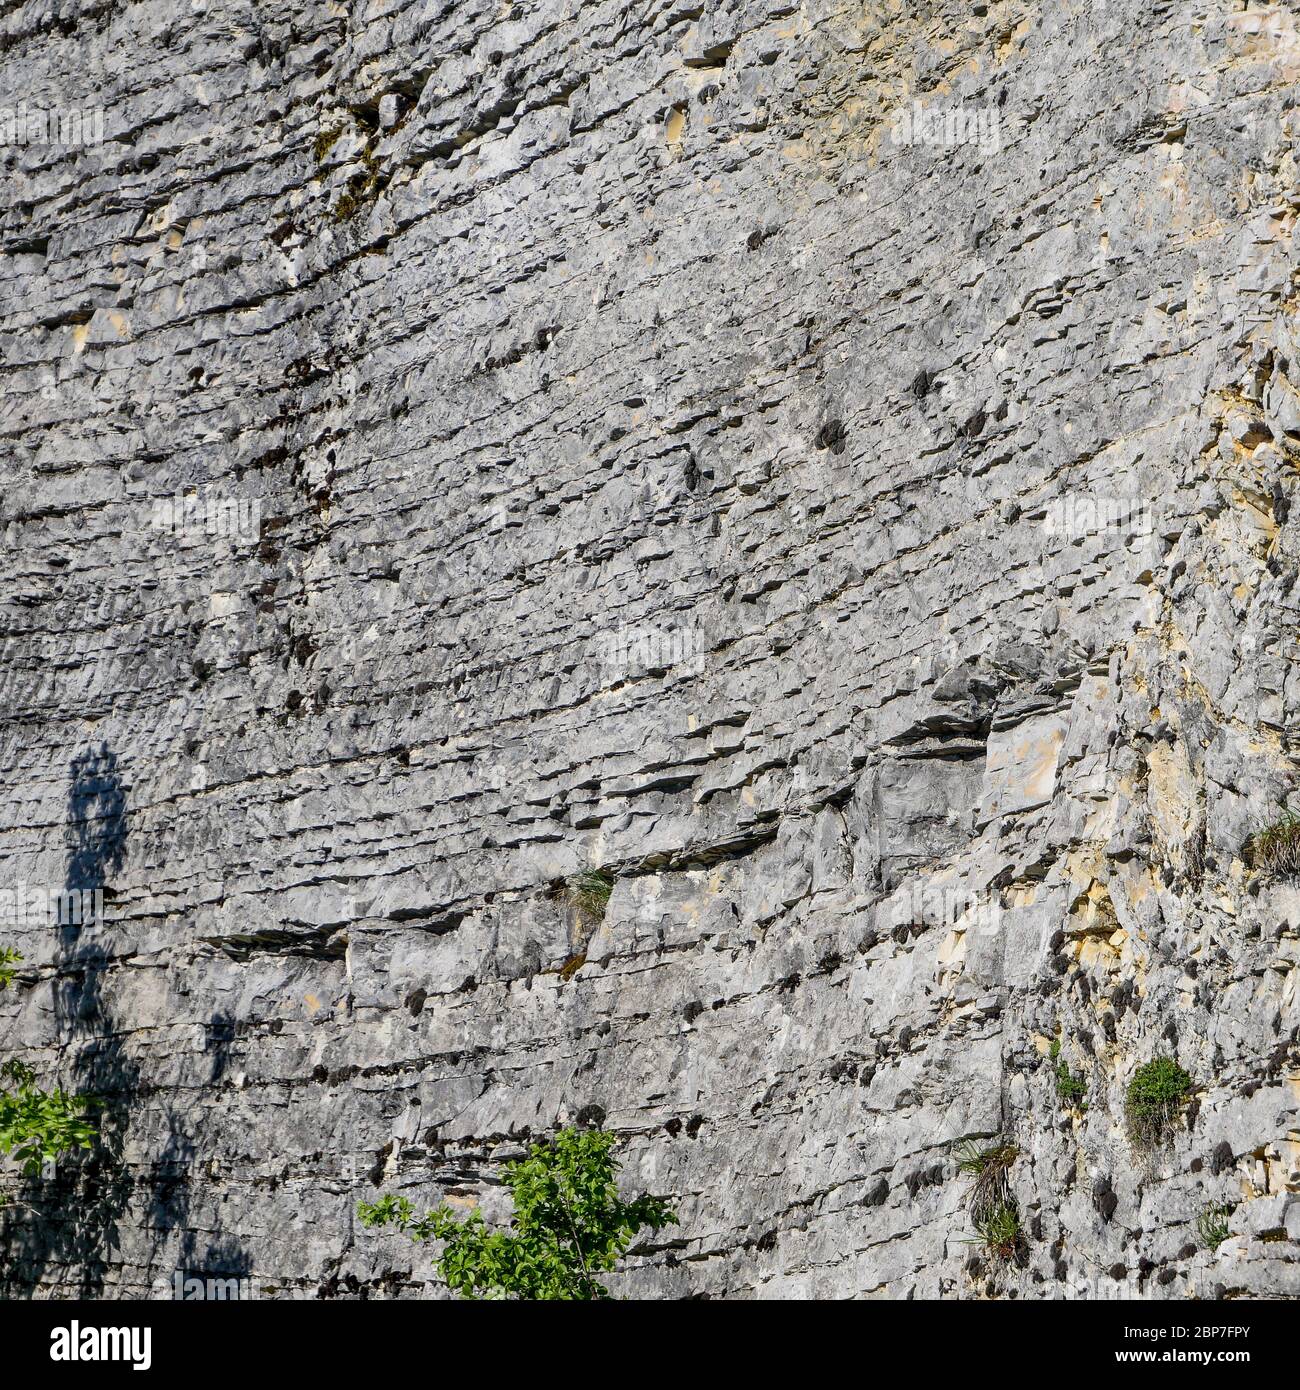 Stone stratas, Stone querry, Cerin, Bugey Massif, Ain, France Stock Photo